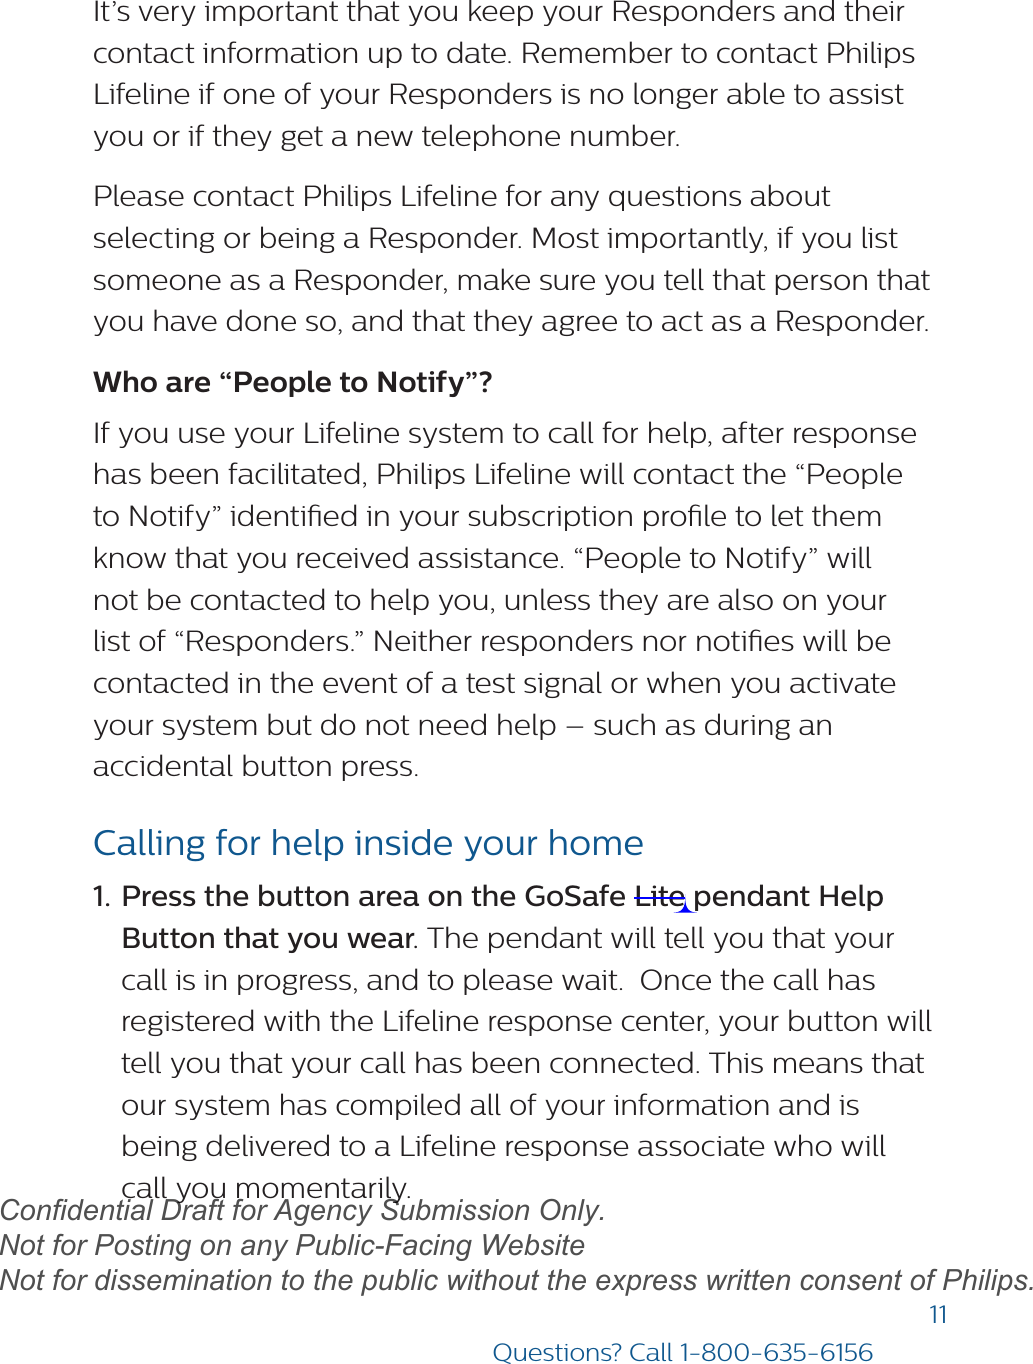 11Questions? Call 1-800-635-6156It’s very important that you keep your Responders and their contact information up to date. Remember to contact Philips Lifeline if one of your Responders is no longer able to assist you or if they get a new telephone number.Please contact Philips Lifeline for any questions about selecting or being a Responder. Most importantly, if you list someone as a Responder, make sure you tell that person that you have done so, and that they agree to act as a Responder.Who are “People to Notify”?If you use your Lifeline system to call for help, after response has been facilitated, Philips Lifeline will contact the “People to Notify” identied in your subscription prole to let them know that you received assistance. “People to Notify” will not be contacted to help you, unless they are also on your list of “Responders.” Neither responders nor noties will be contacted in the event of a test signal or when you activate your system but do not need help – such as during an accidental button press.Calling for help inside your home1. Press the button area on the GoSafe Lite pendant HelpButton that you wear. The pendant will tell you that yourcall is in progress, and to please wait.  Once the call hasregistered with the Lifeline response center, your button willtell you that your call has been connected. This means thatour system has compiled all of your information and isbeing delivered to a Lifeline response associate who willcall you momentarily.draftConfidential Draft for Agency Submission Only.   Not for Posting on any Public-Facing Website Not for dissemination to the public without the express written consent of Philips.